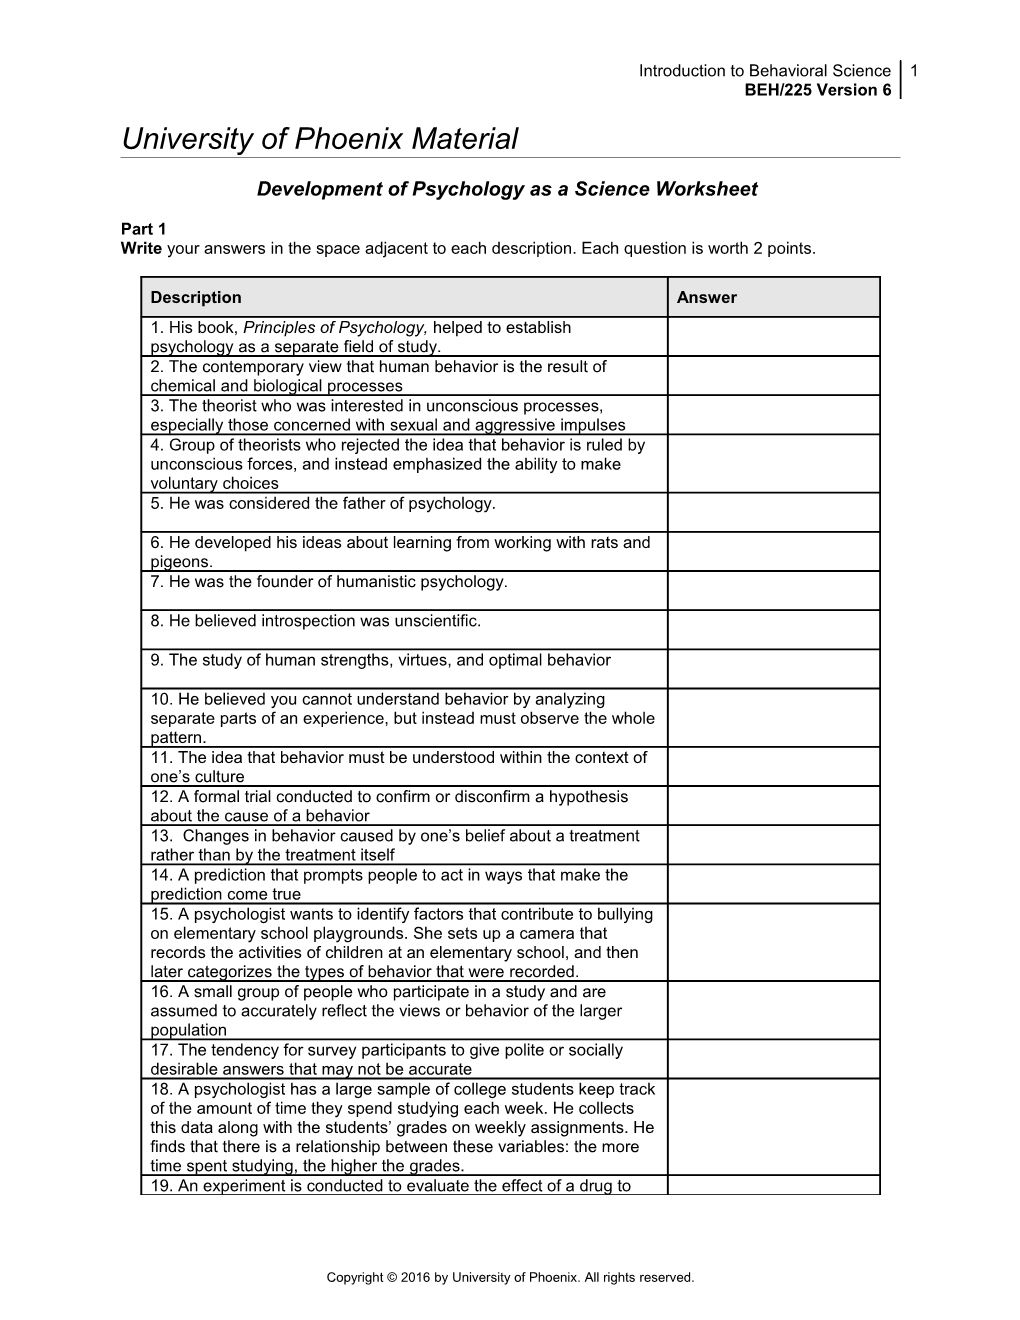 Development of Psychology As a Science Worksheet